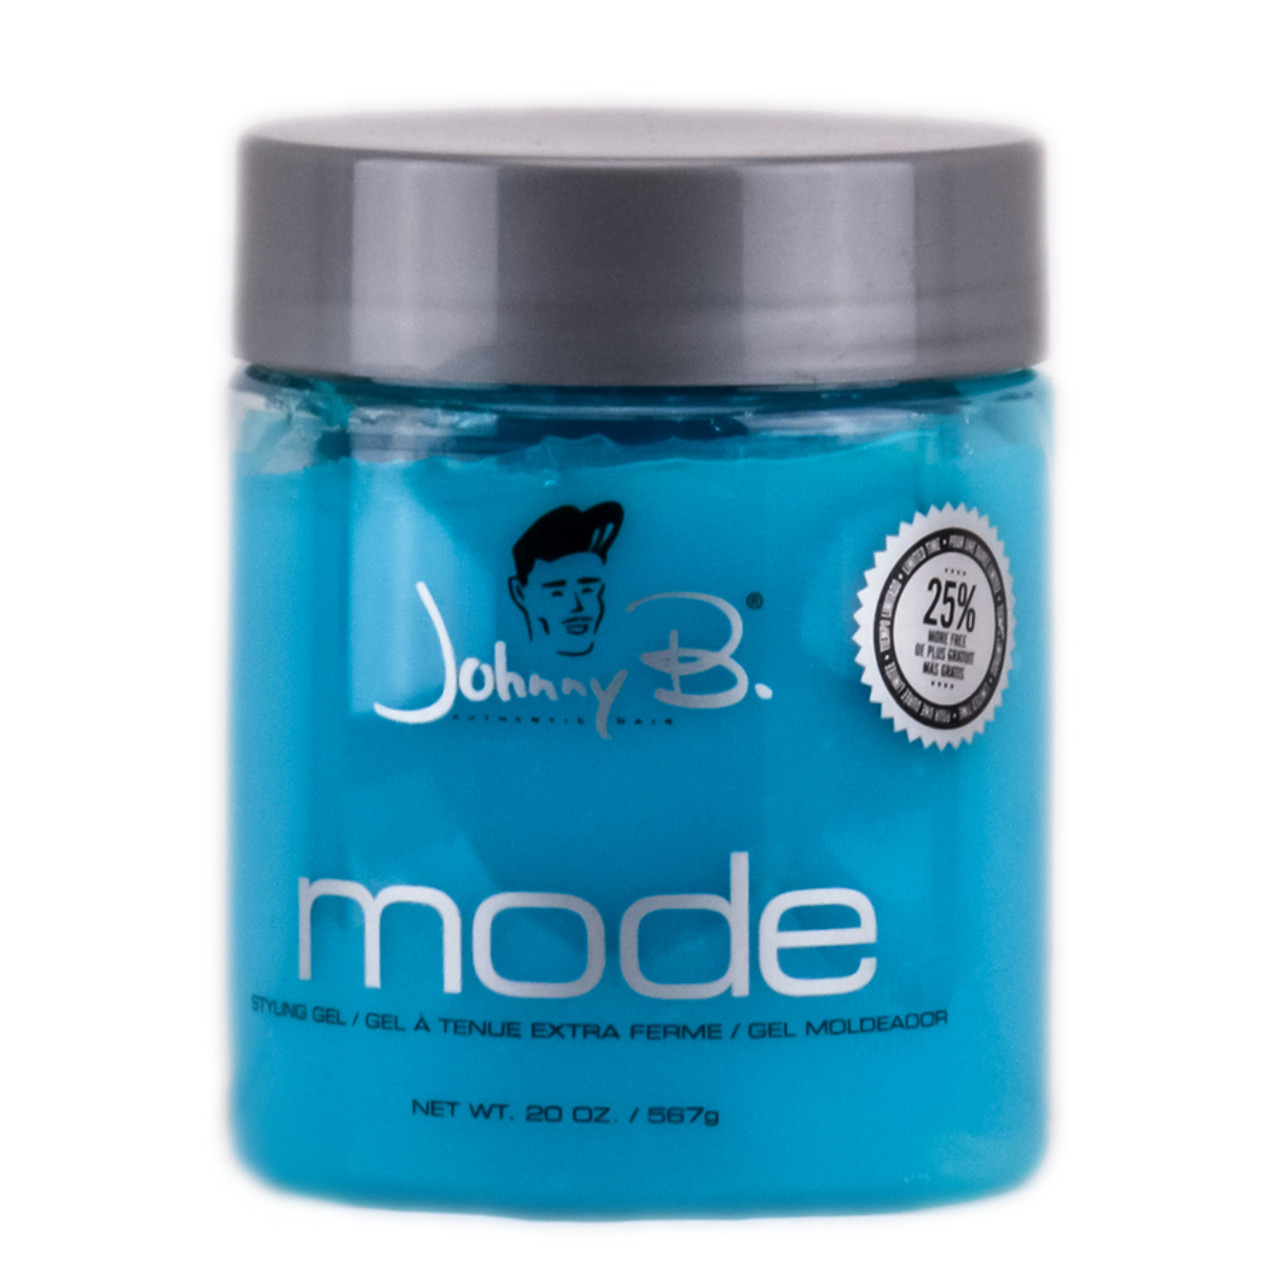  Johnny B Mode Hair Styling Gel 64 oz. : Beauty & Personal Care